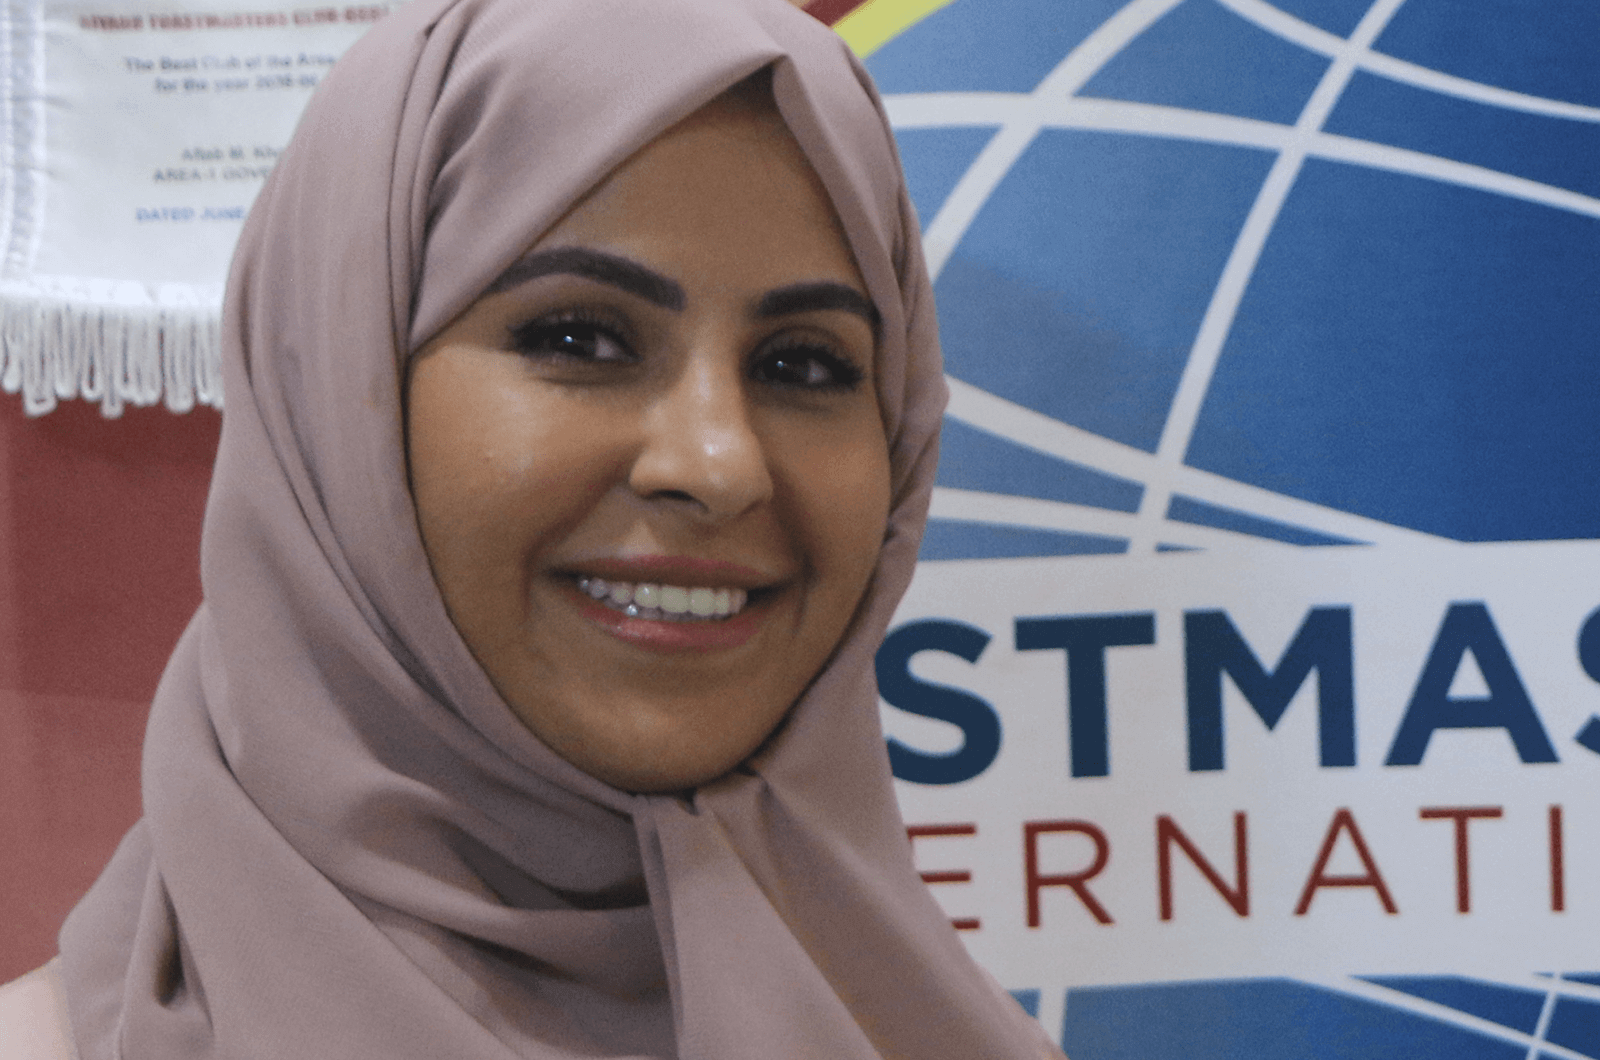 Woman wearing hijab standing in front of Toastmasters banner